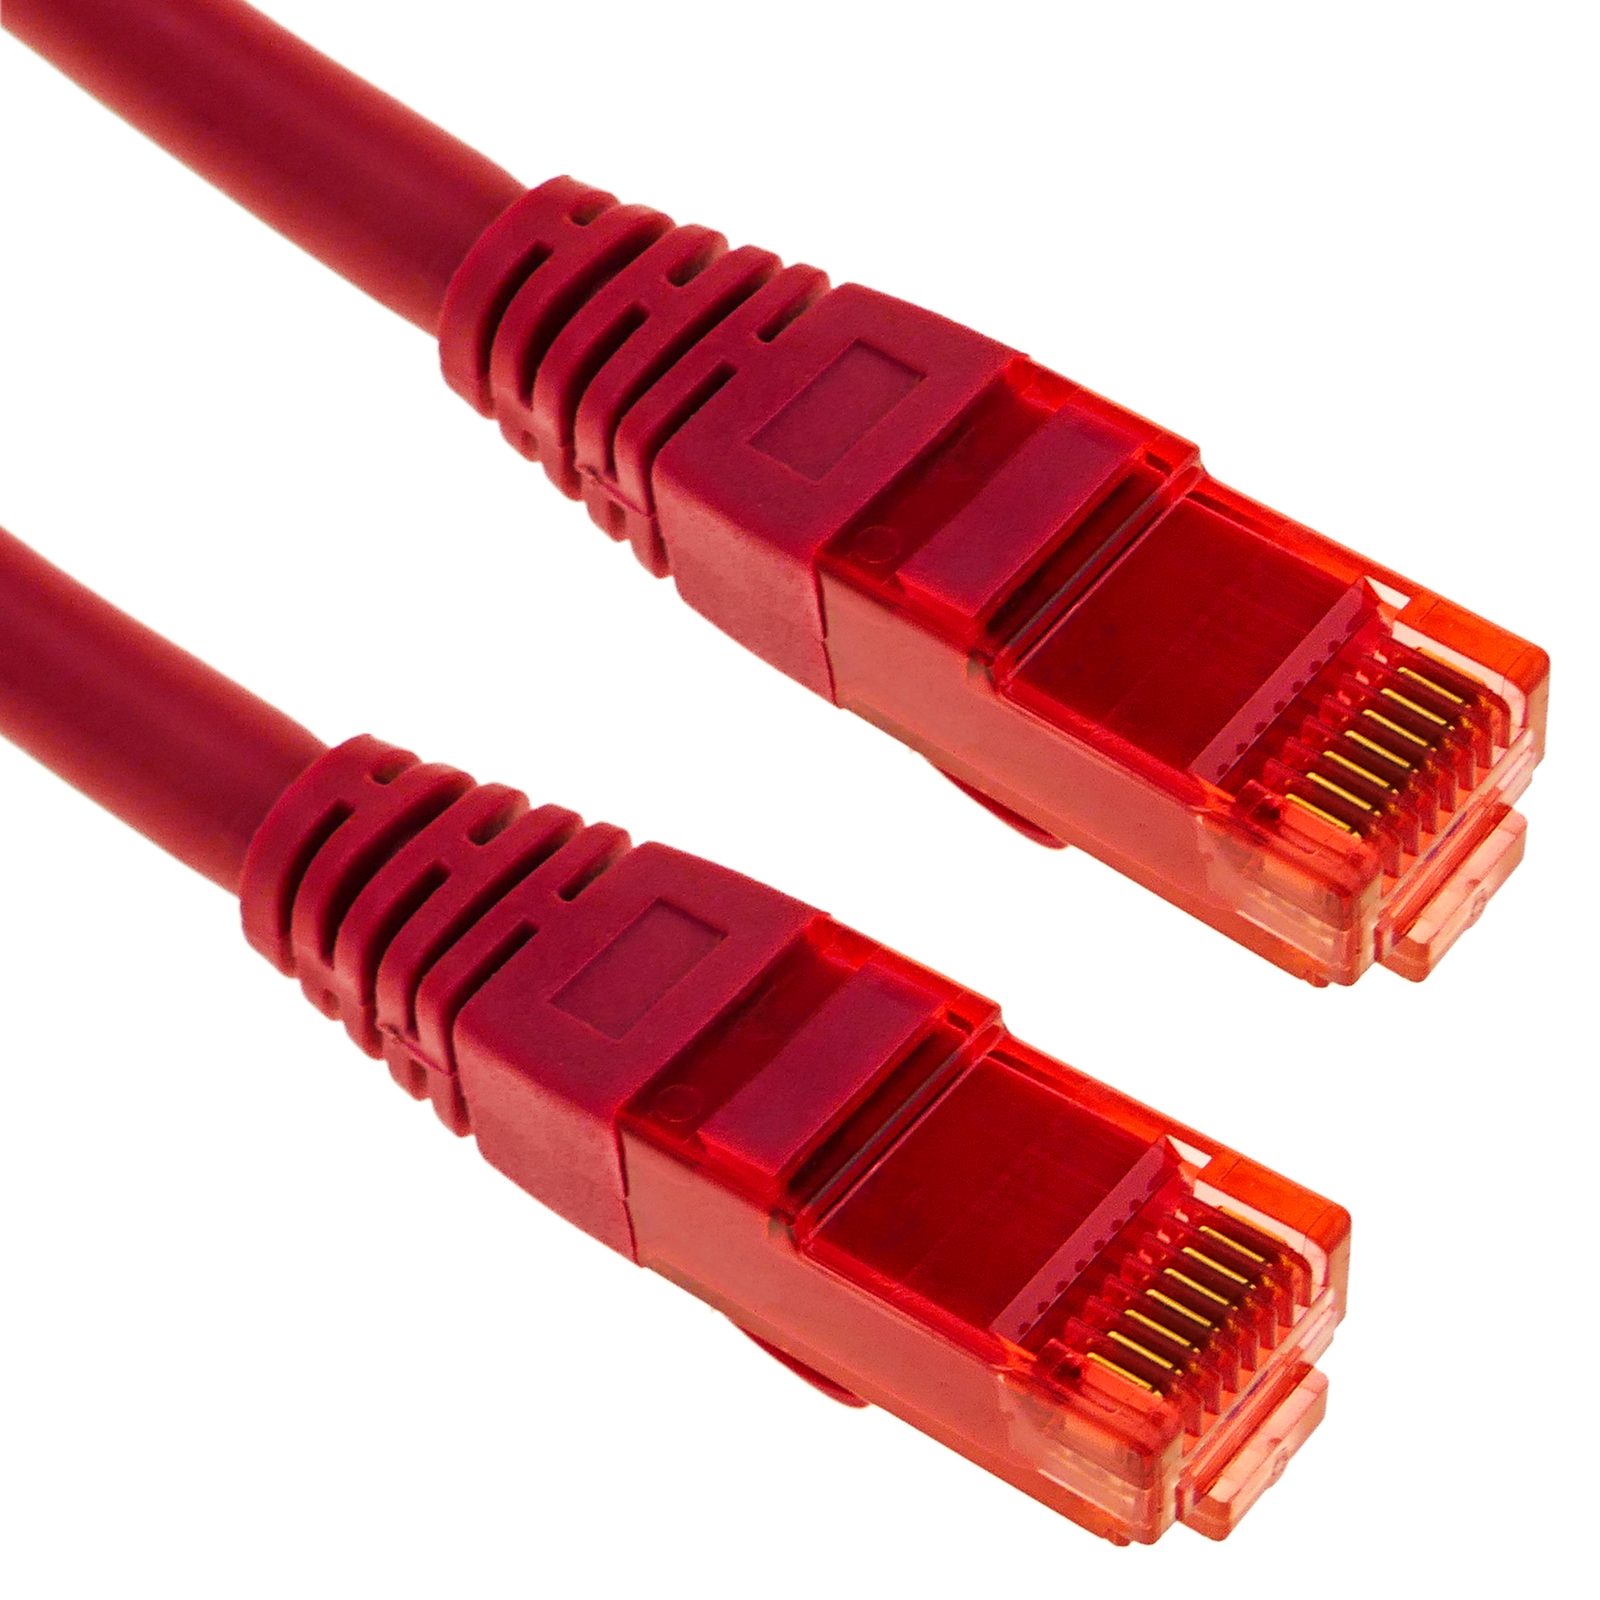 Cable De Red Cat 8 Ethernet Conector Rj45 48 Gbps 2 Metros